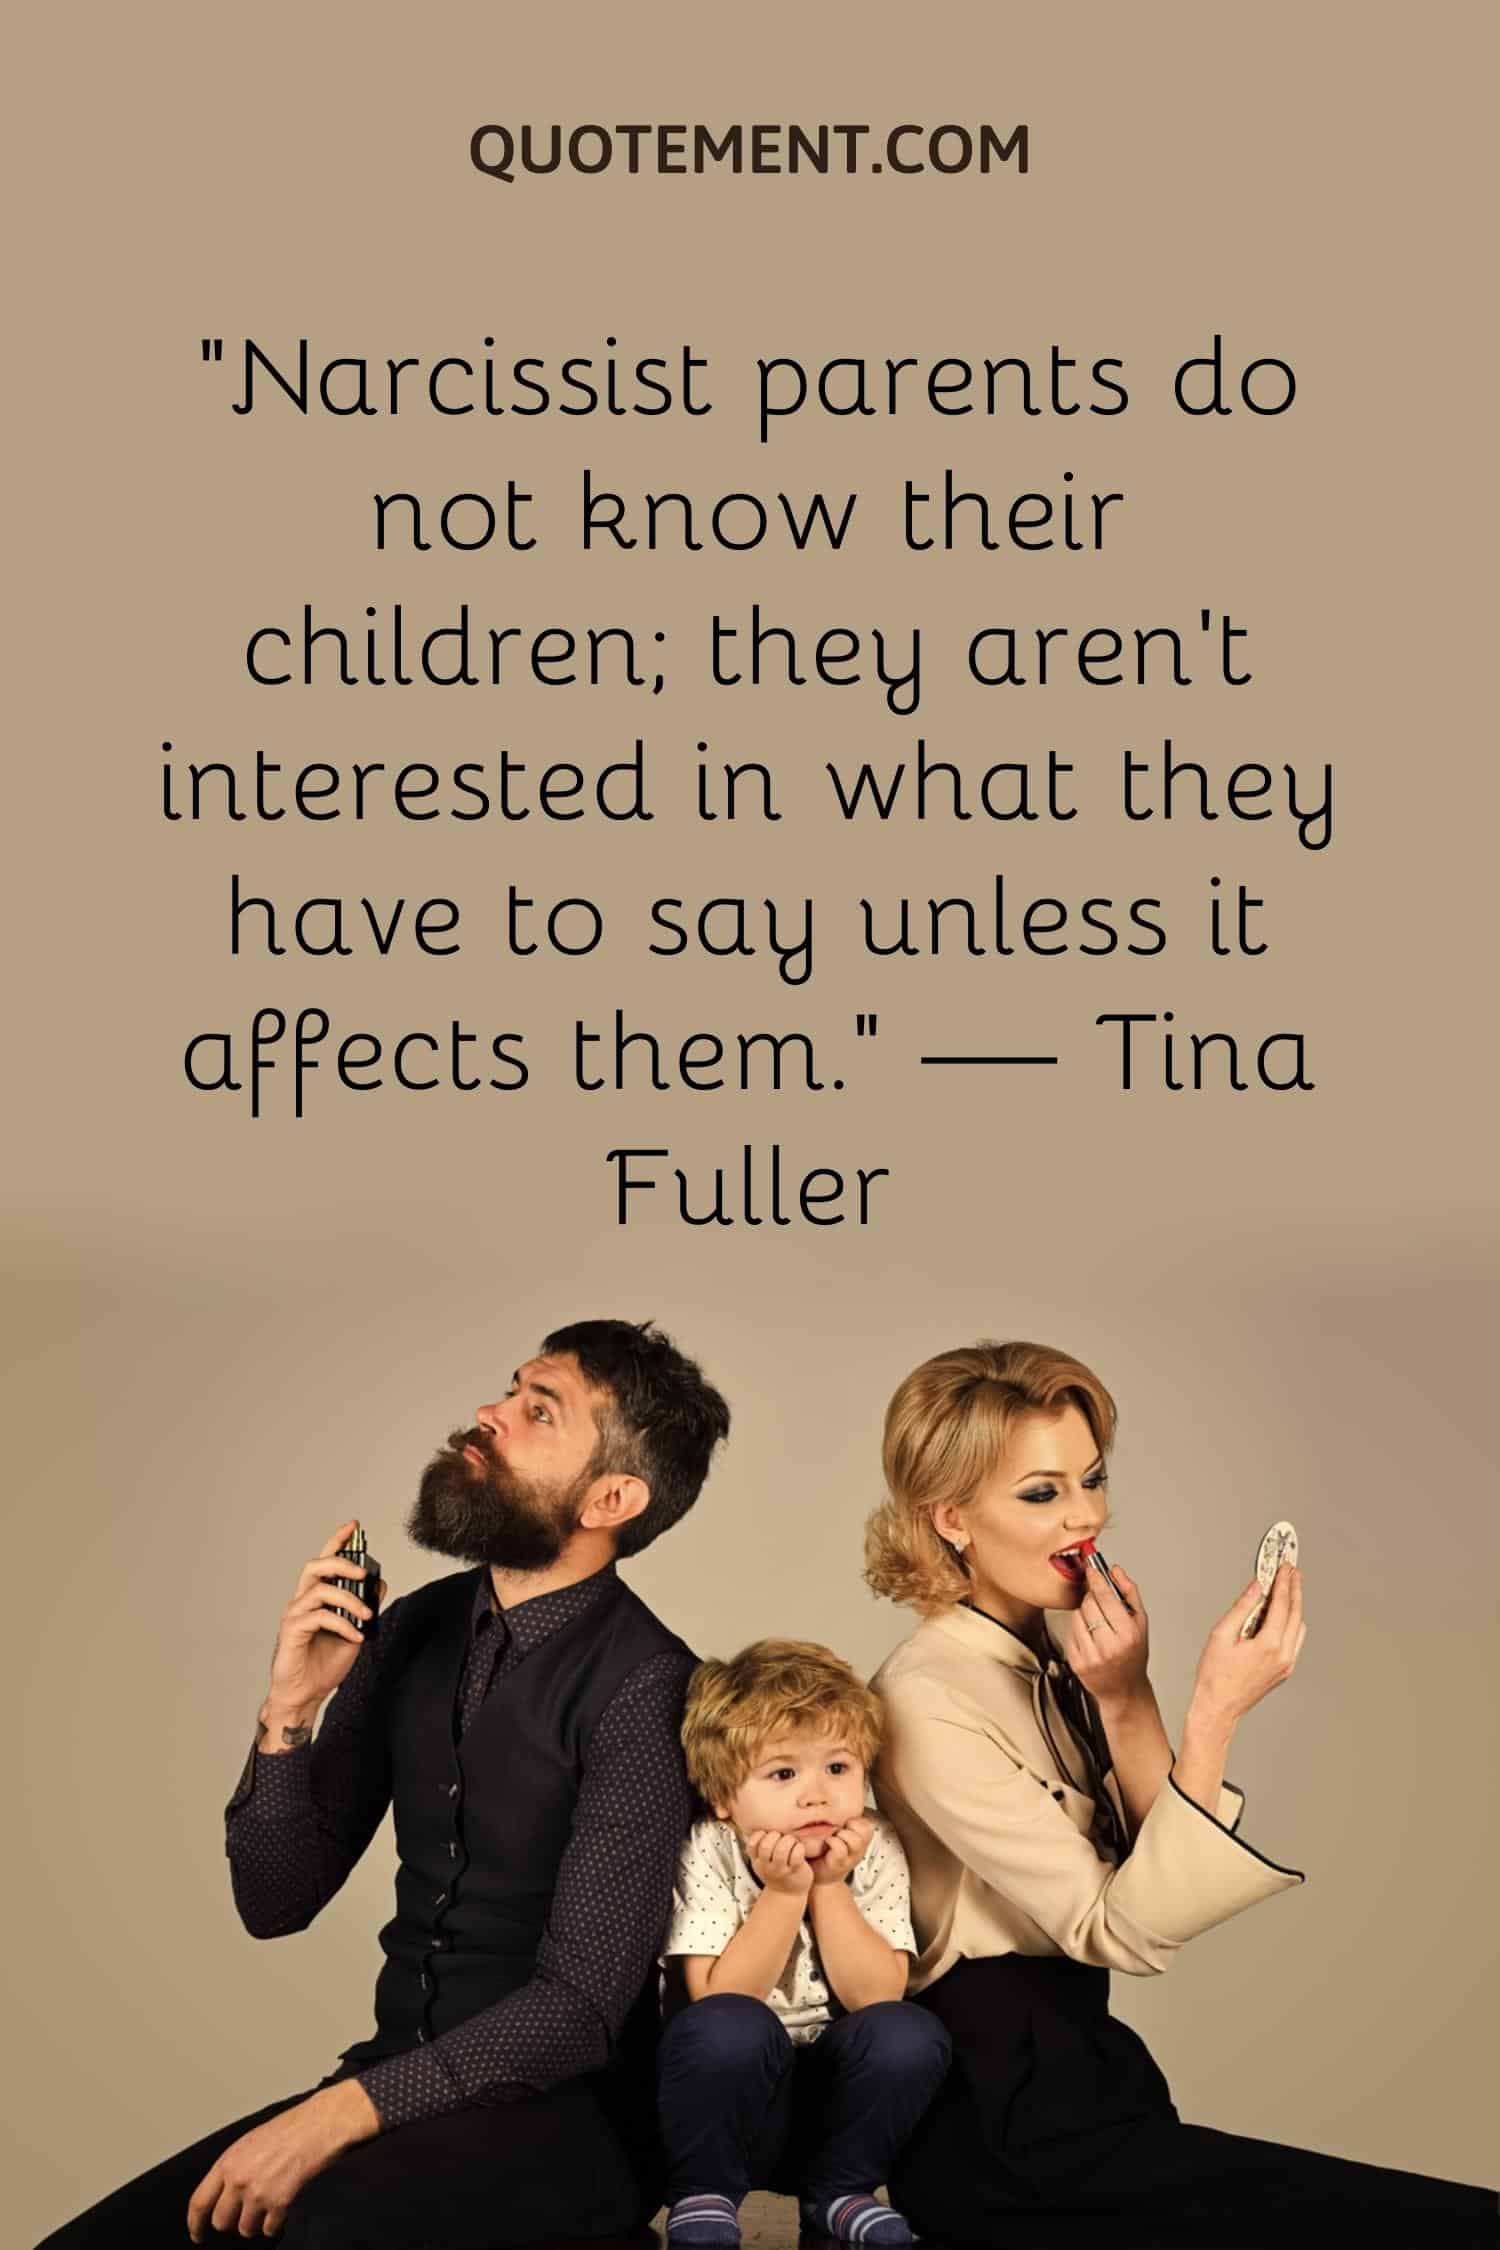 Narcissist parents do not know their children